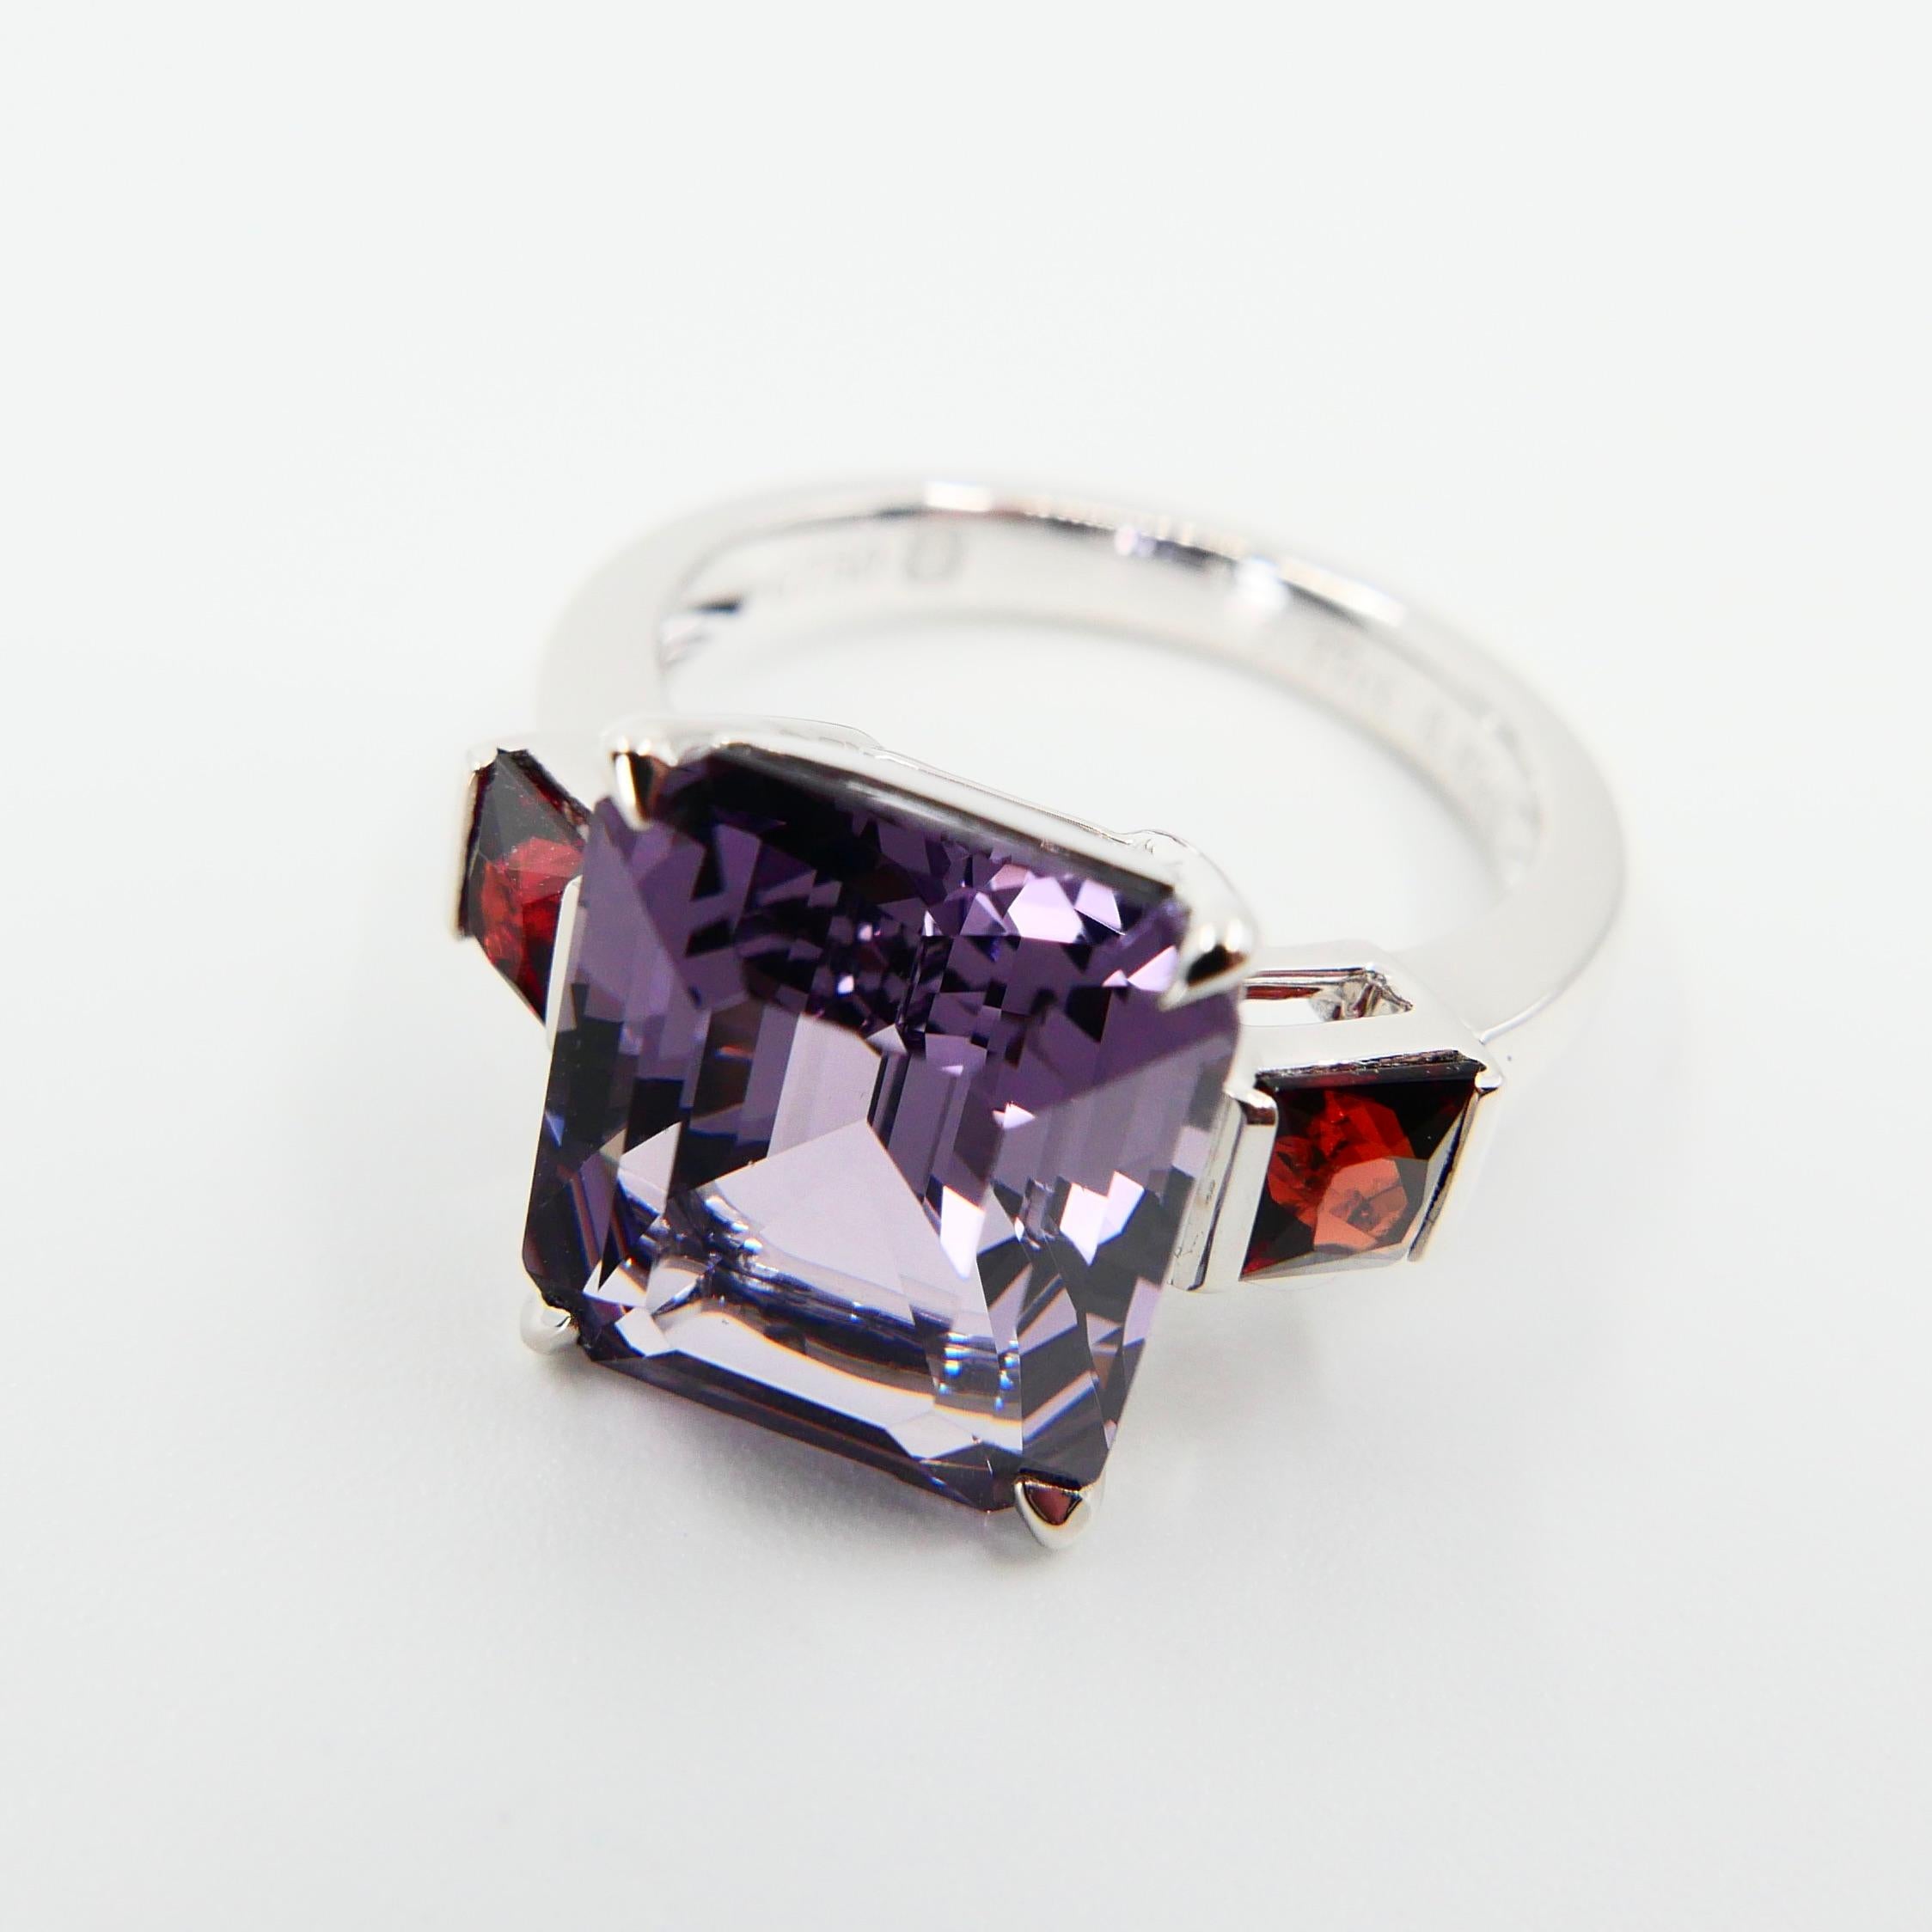 Natural 7.77 Cts Purple Spinel & 0.83 Carat Red Spinel Three-Stone Cocktail Ring 7